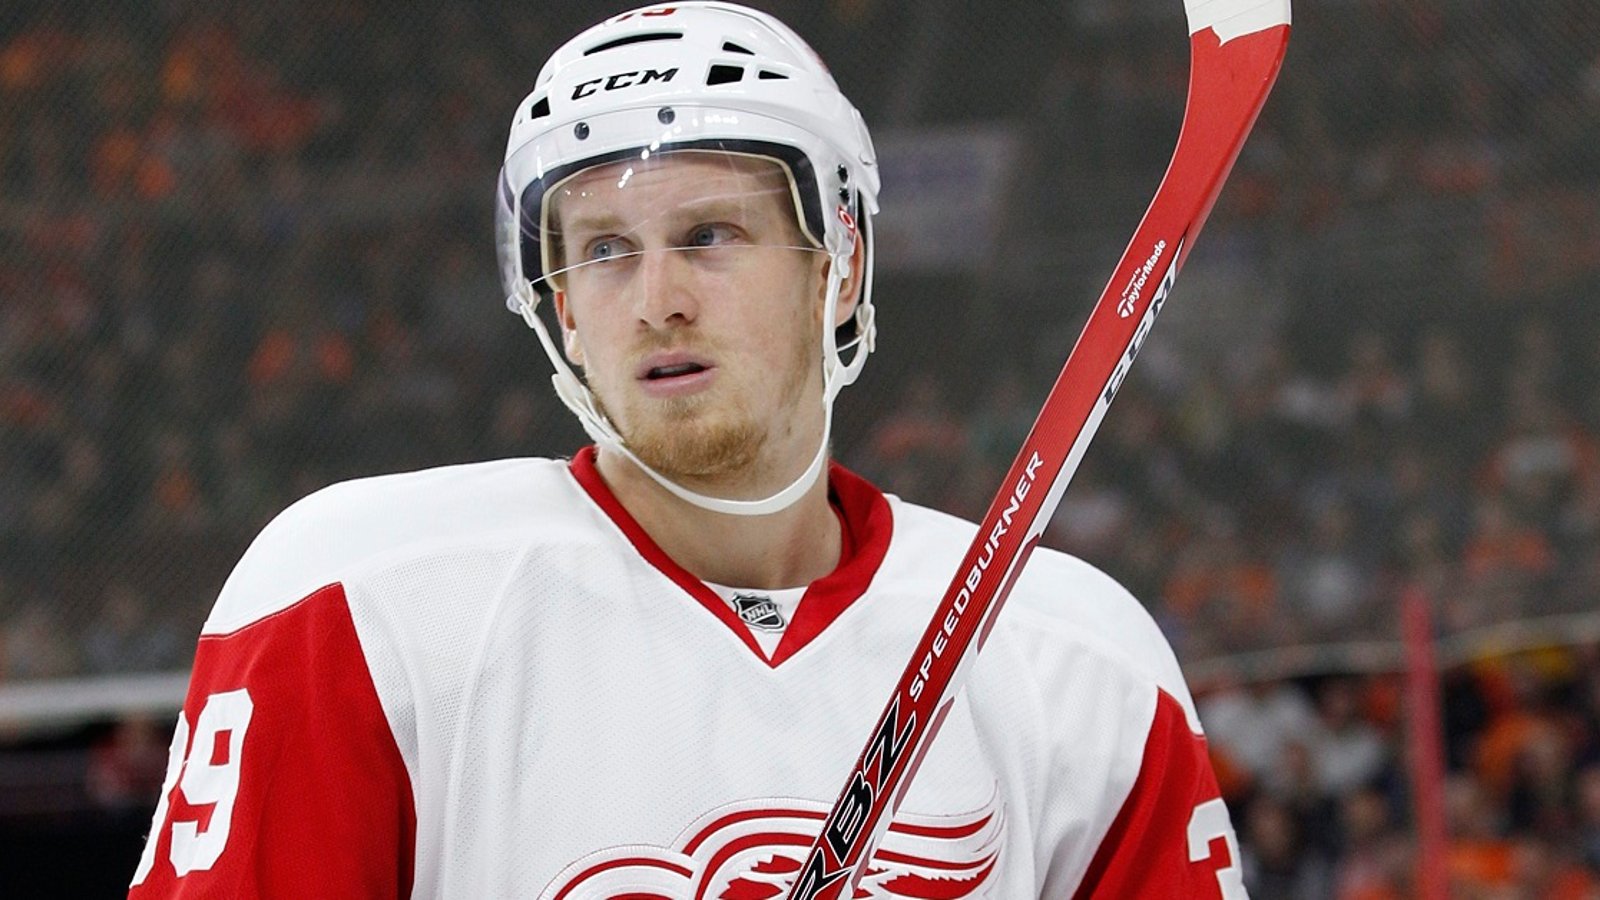 Breaking: Rumors of a major trading involving Anthony Mantha.